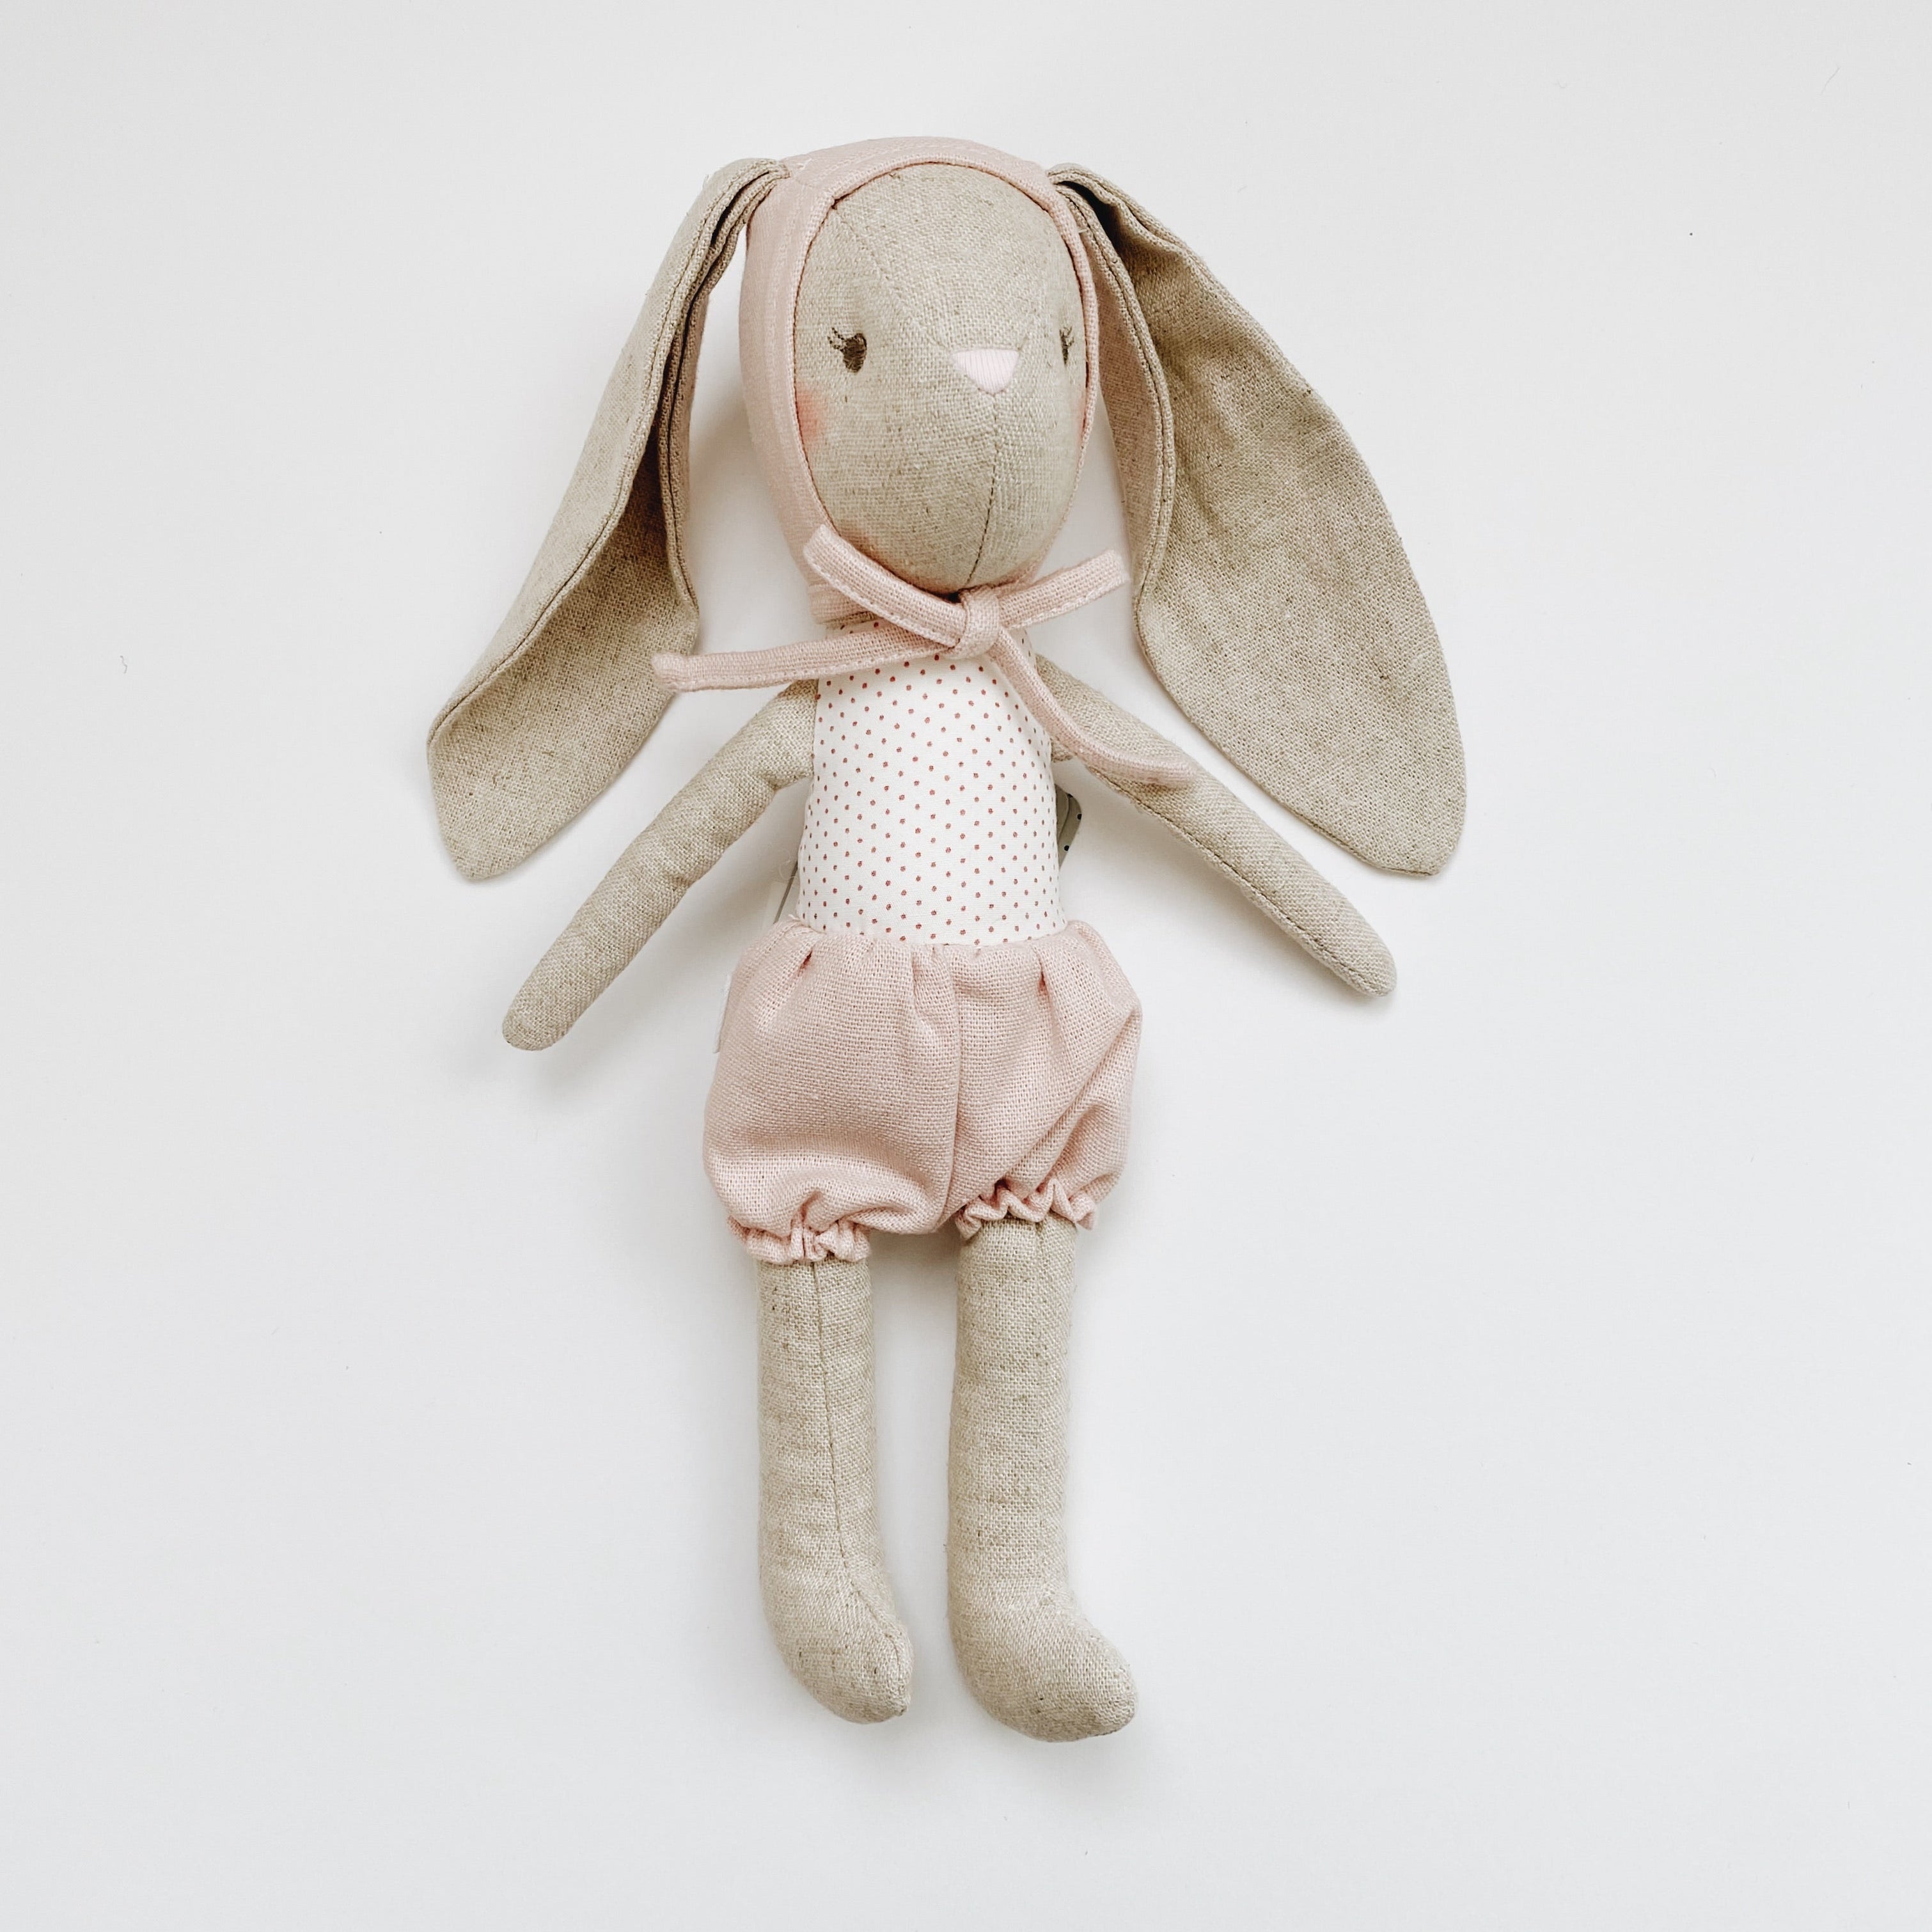 Baby Bunny in Bonnet or Bow Tie– Andnest